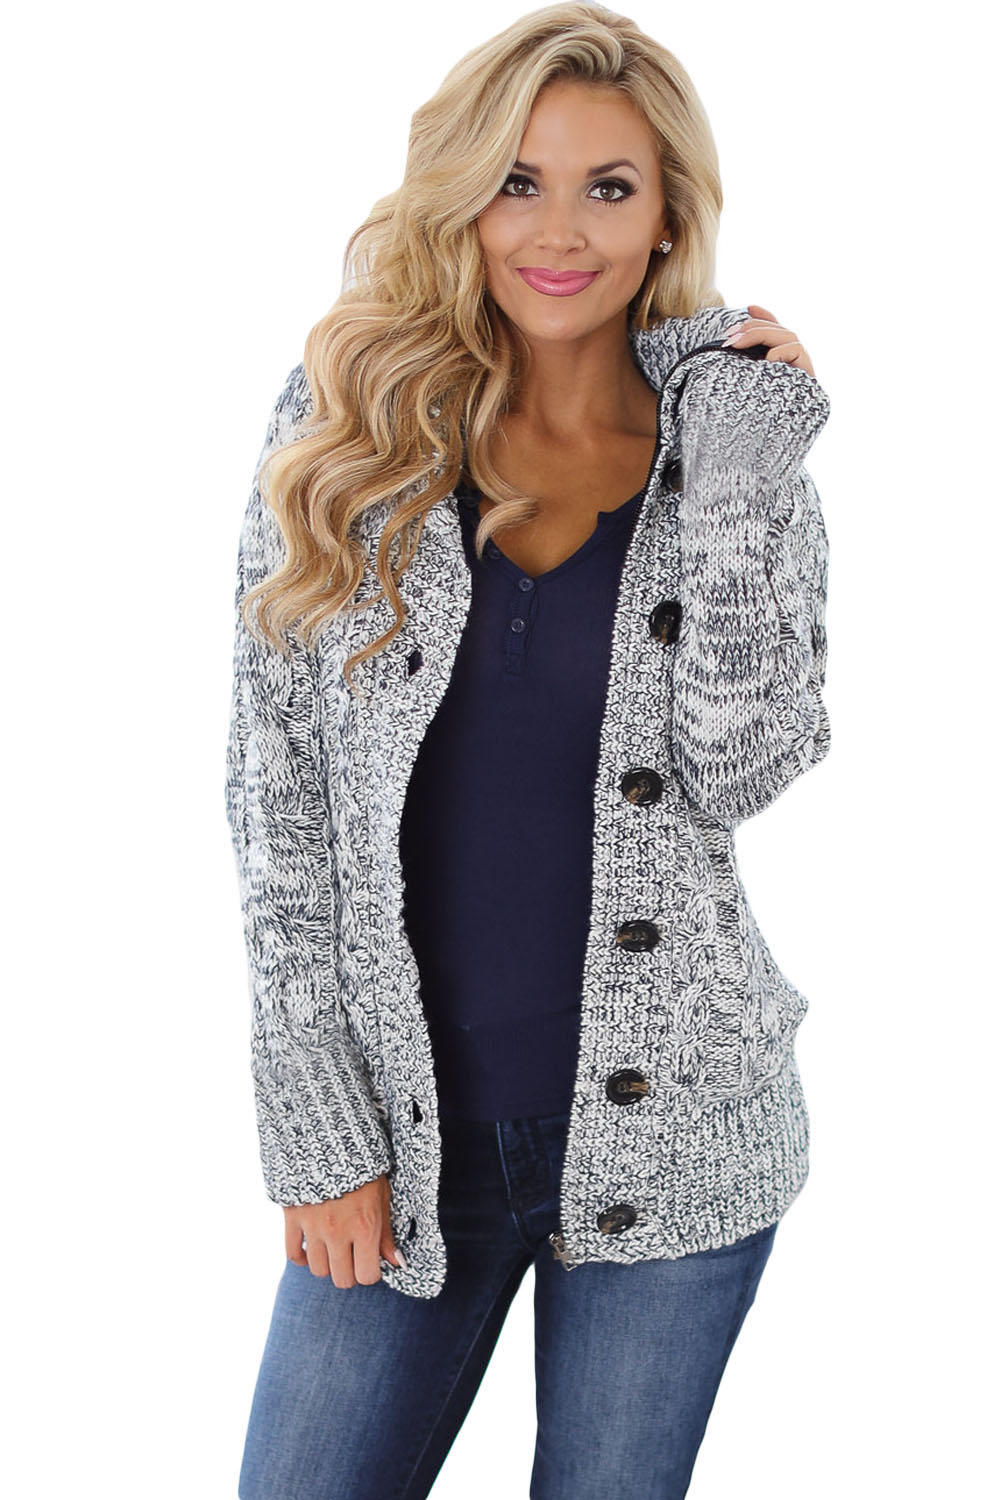 Fashion Dark Gray Long Sleeve Button-up Hooded Cardigans